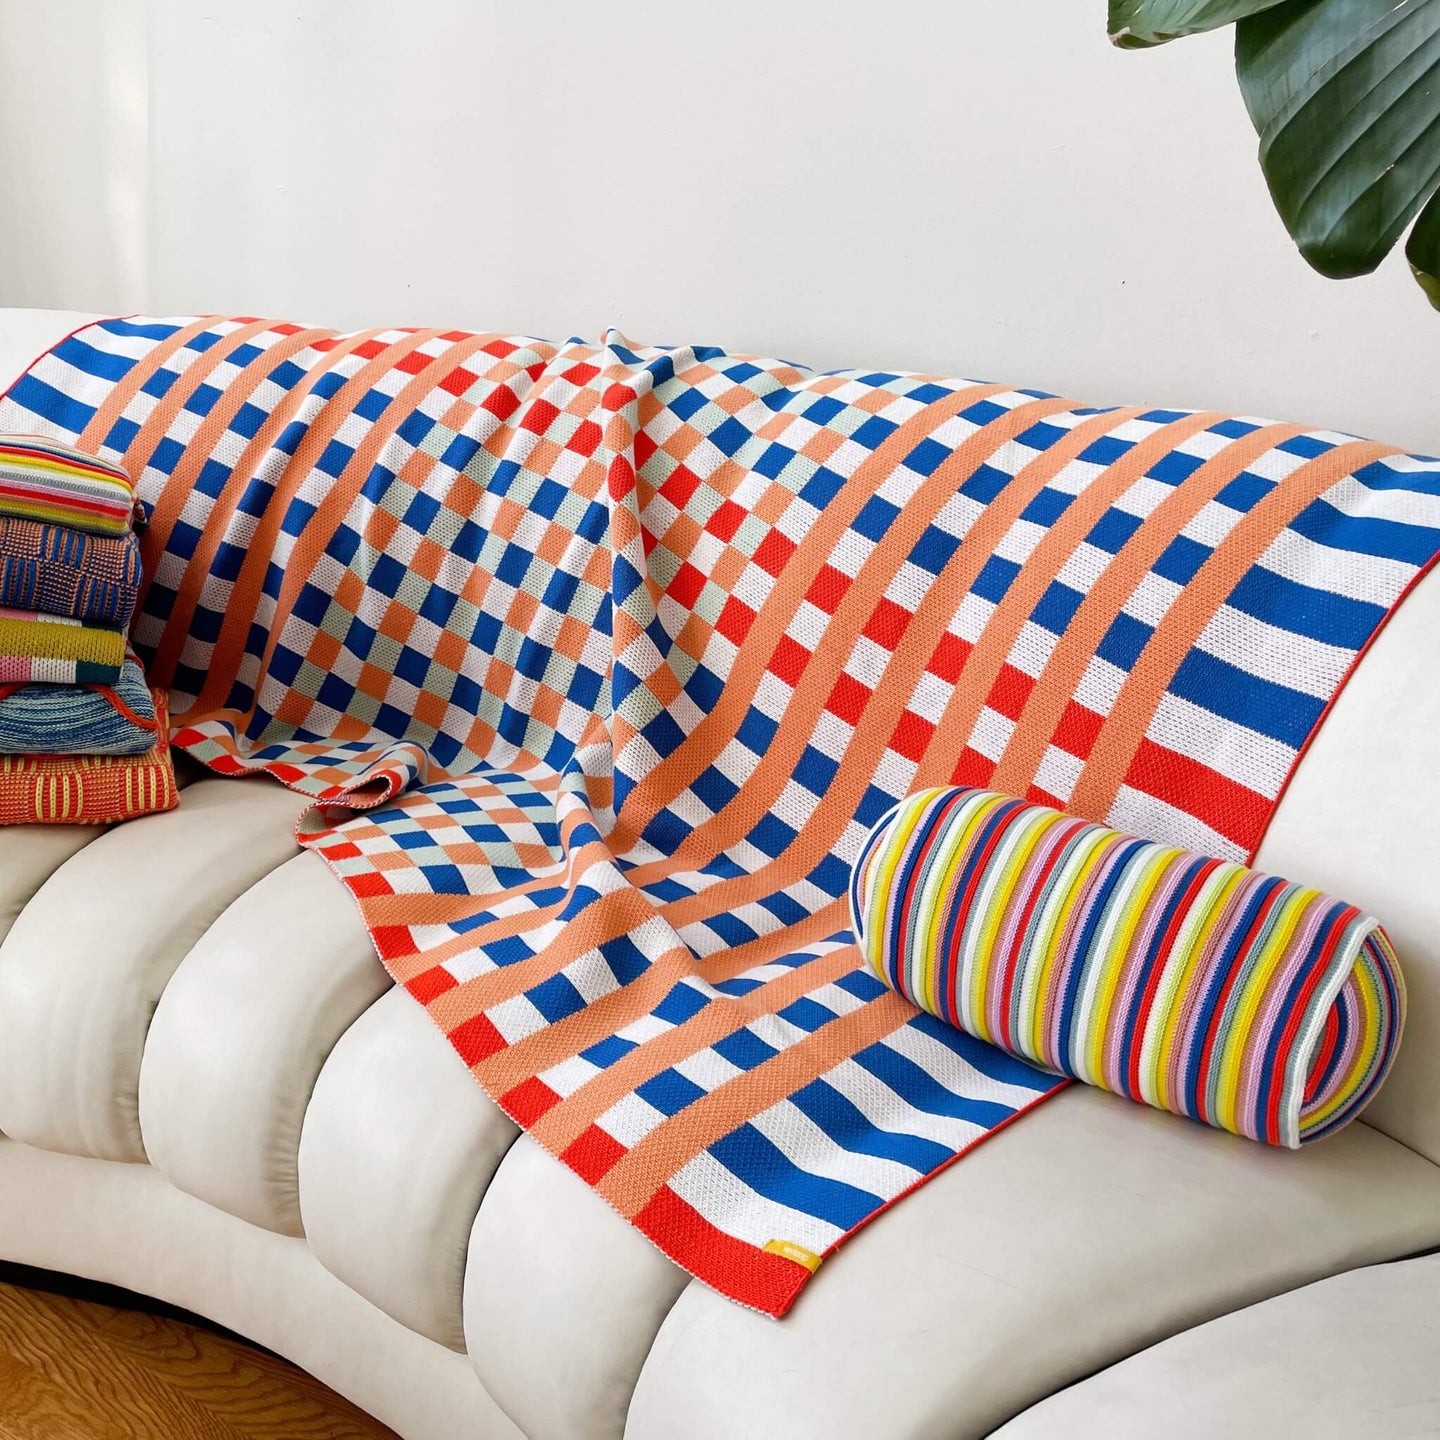 Square Square Knit Throw Checkerboard Gingham Pattern Soft Blanket In Use on couch